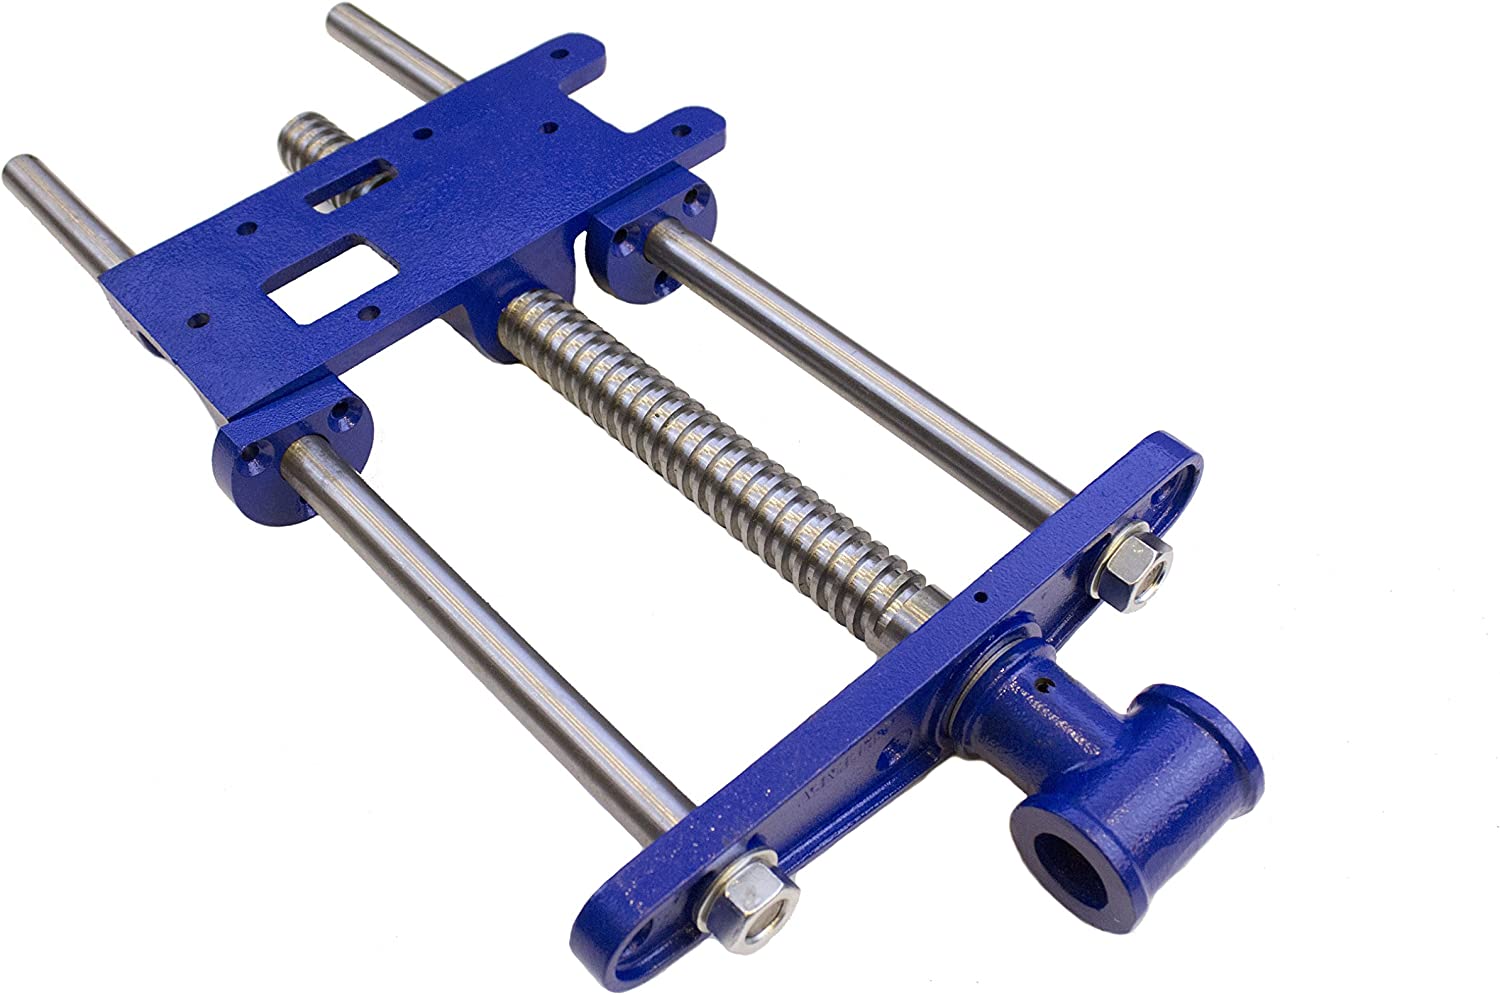 Yost Tools 10" Front Vise (for workbench) $50.86